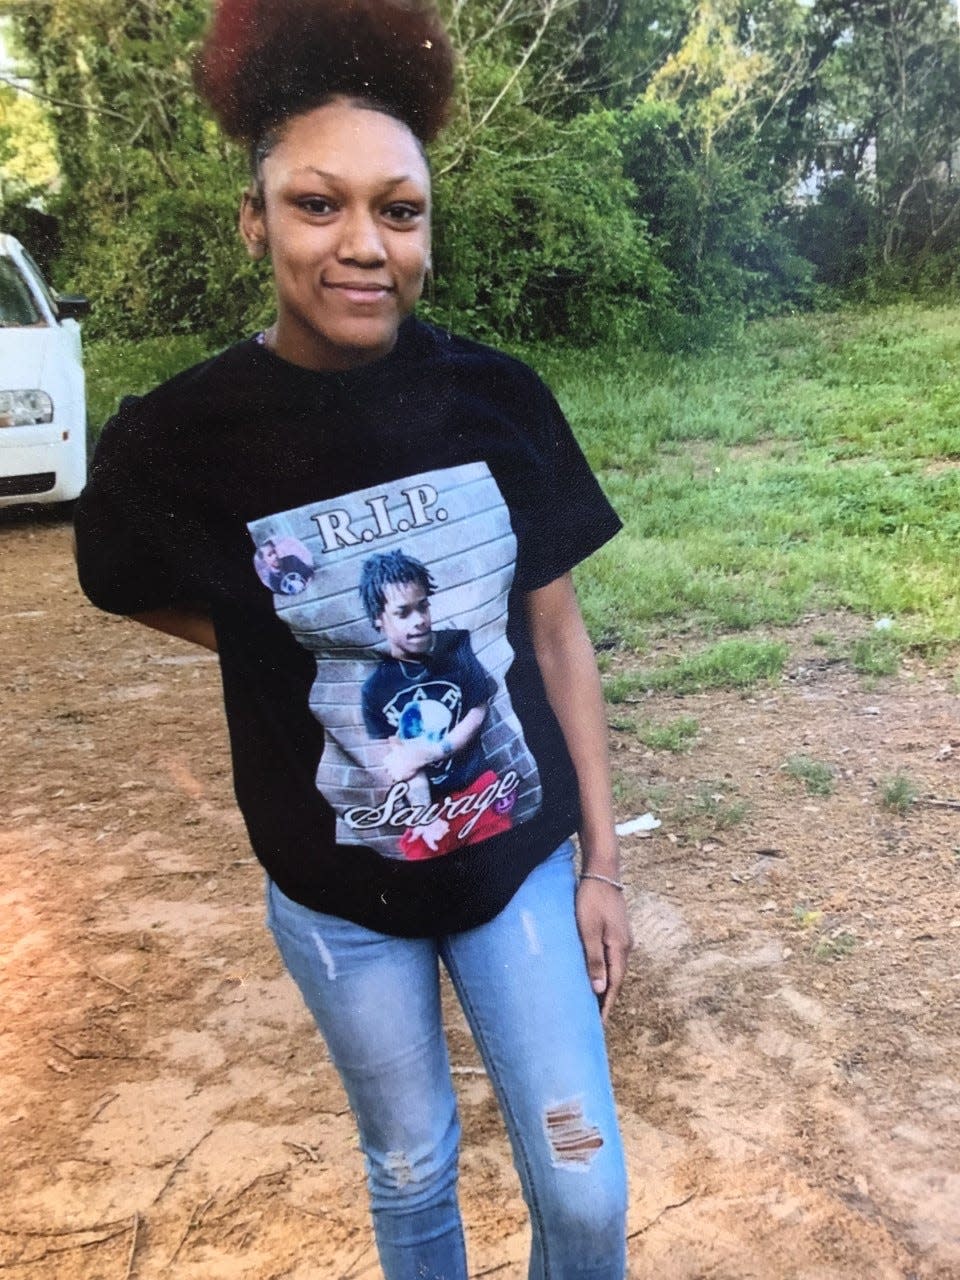 Skyteria Poston is seen wearing a shirt remembering her brother who was shot and killed in Shelby years earlier.